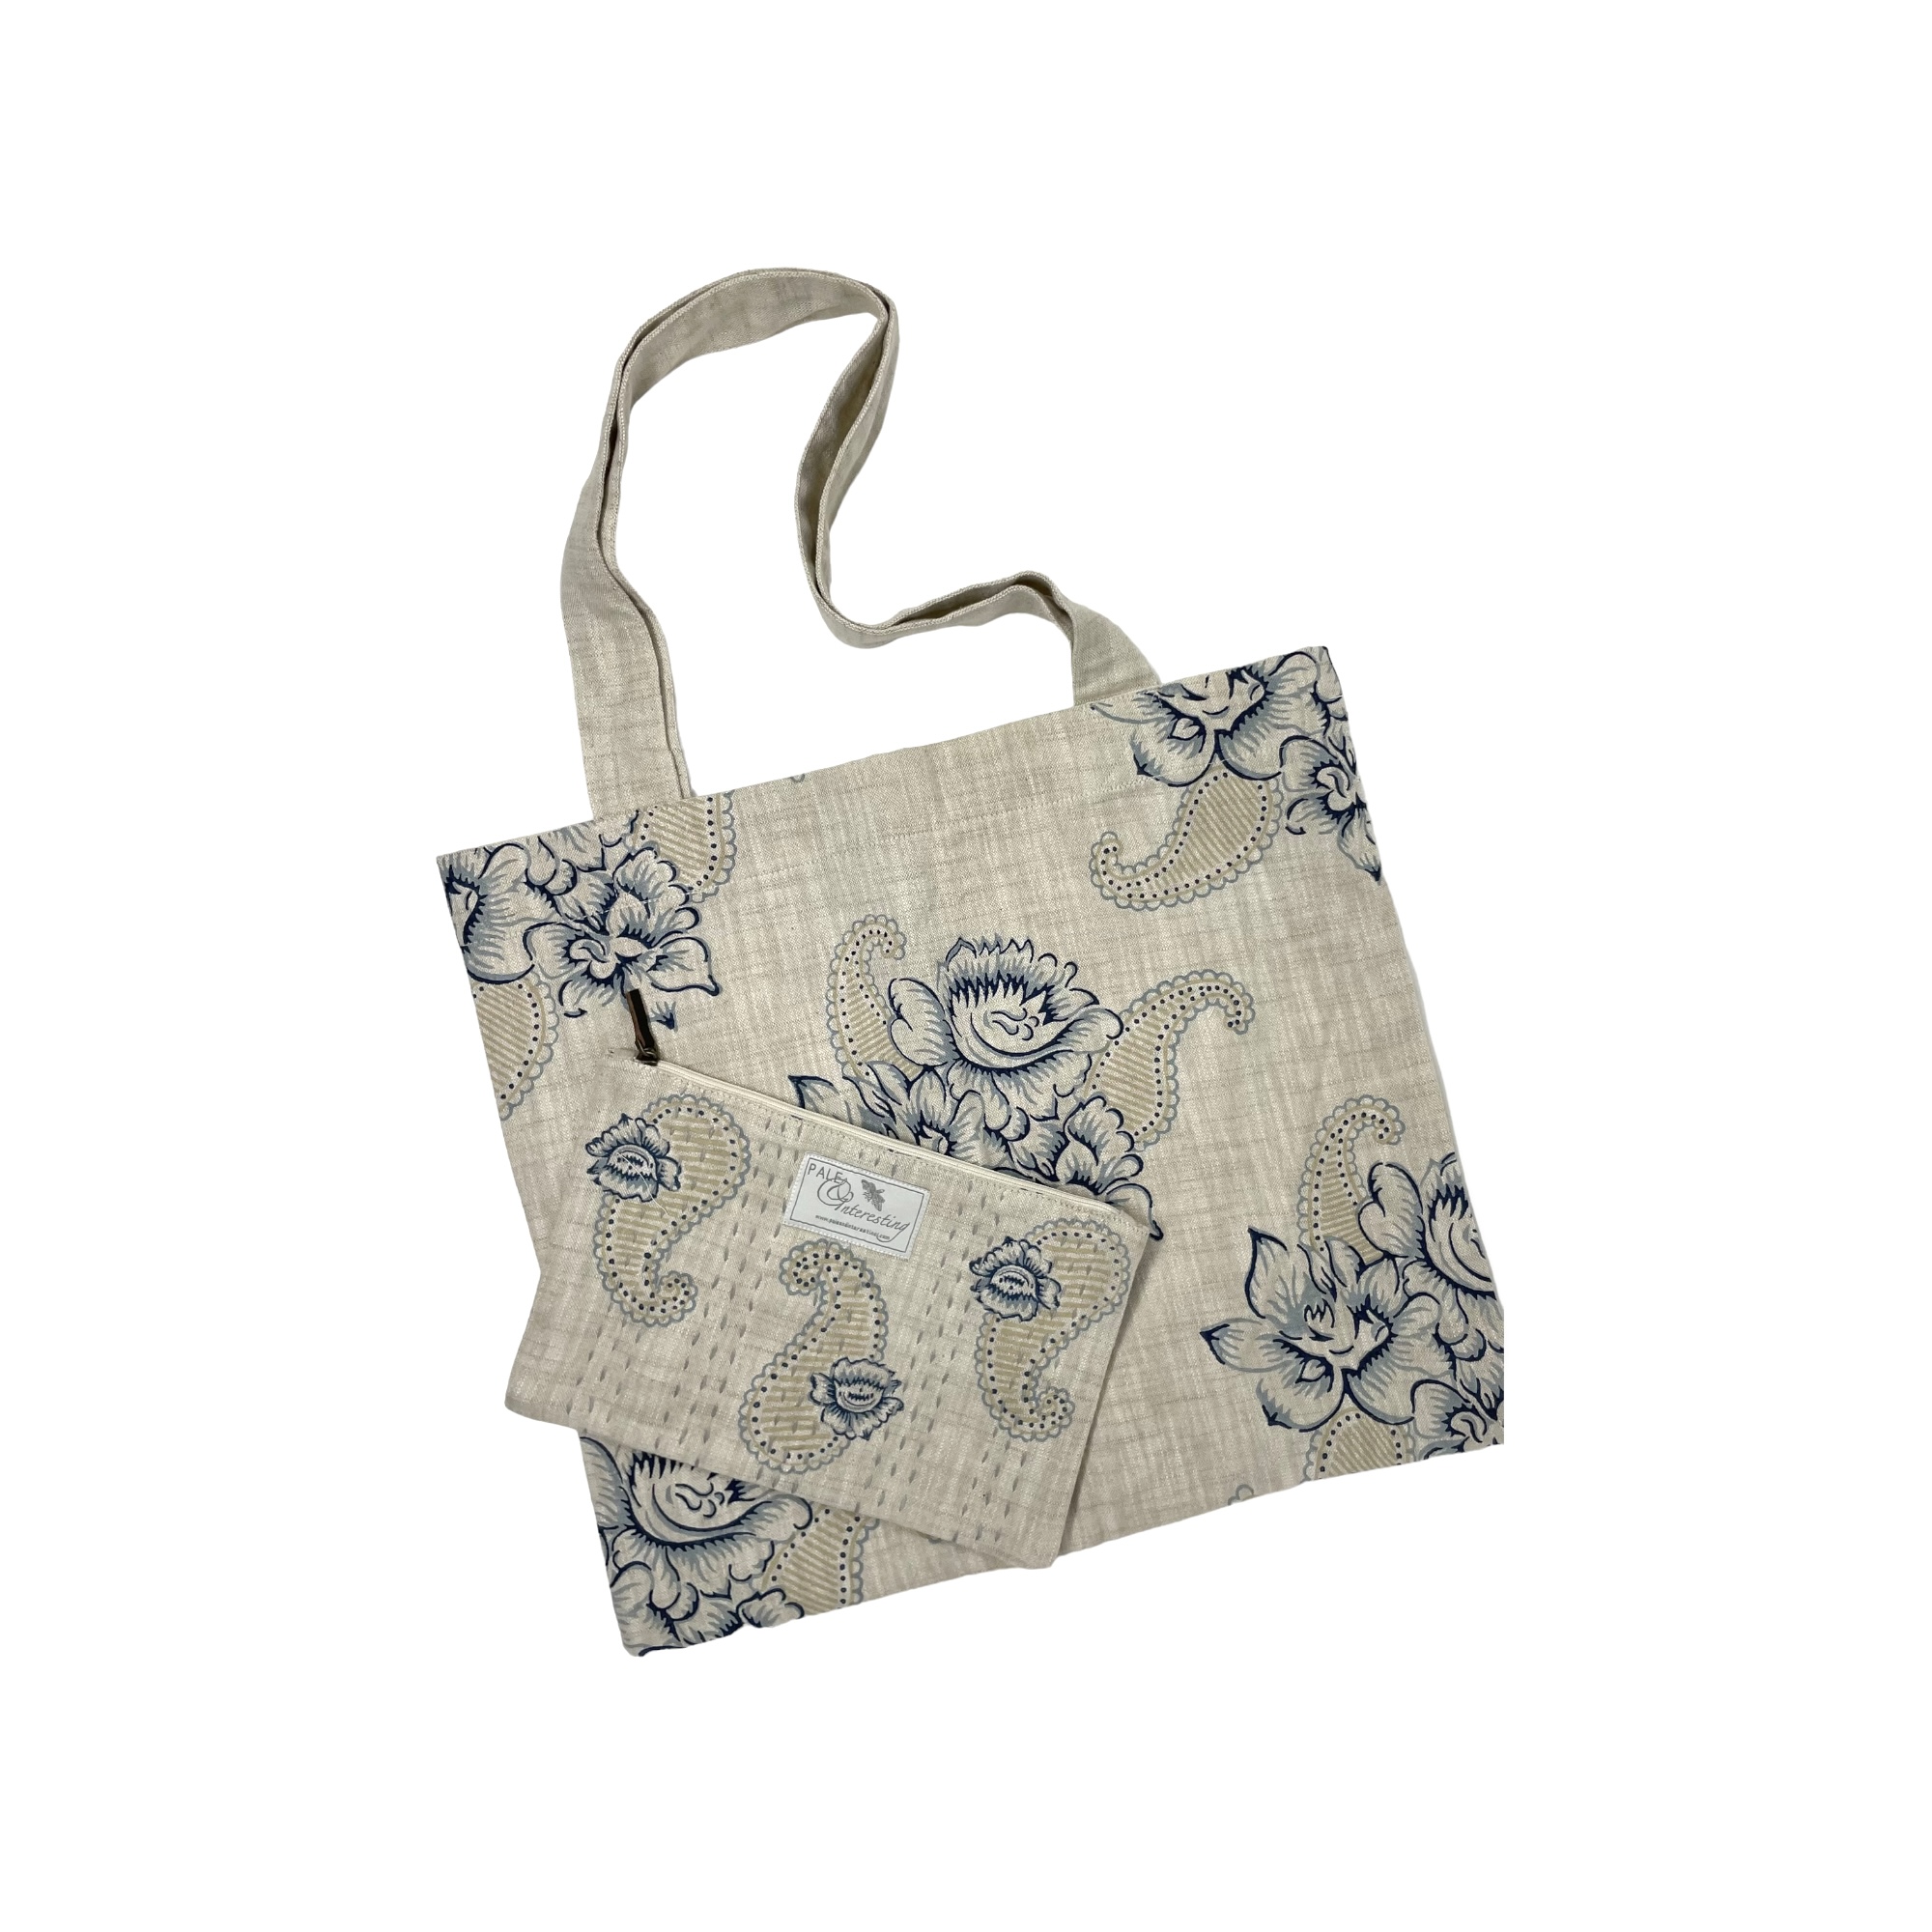 Pale & Interesting Set of Roses and Paisley  Tote and Kantha Anything Bag in Natural Chambray